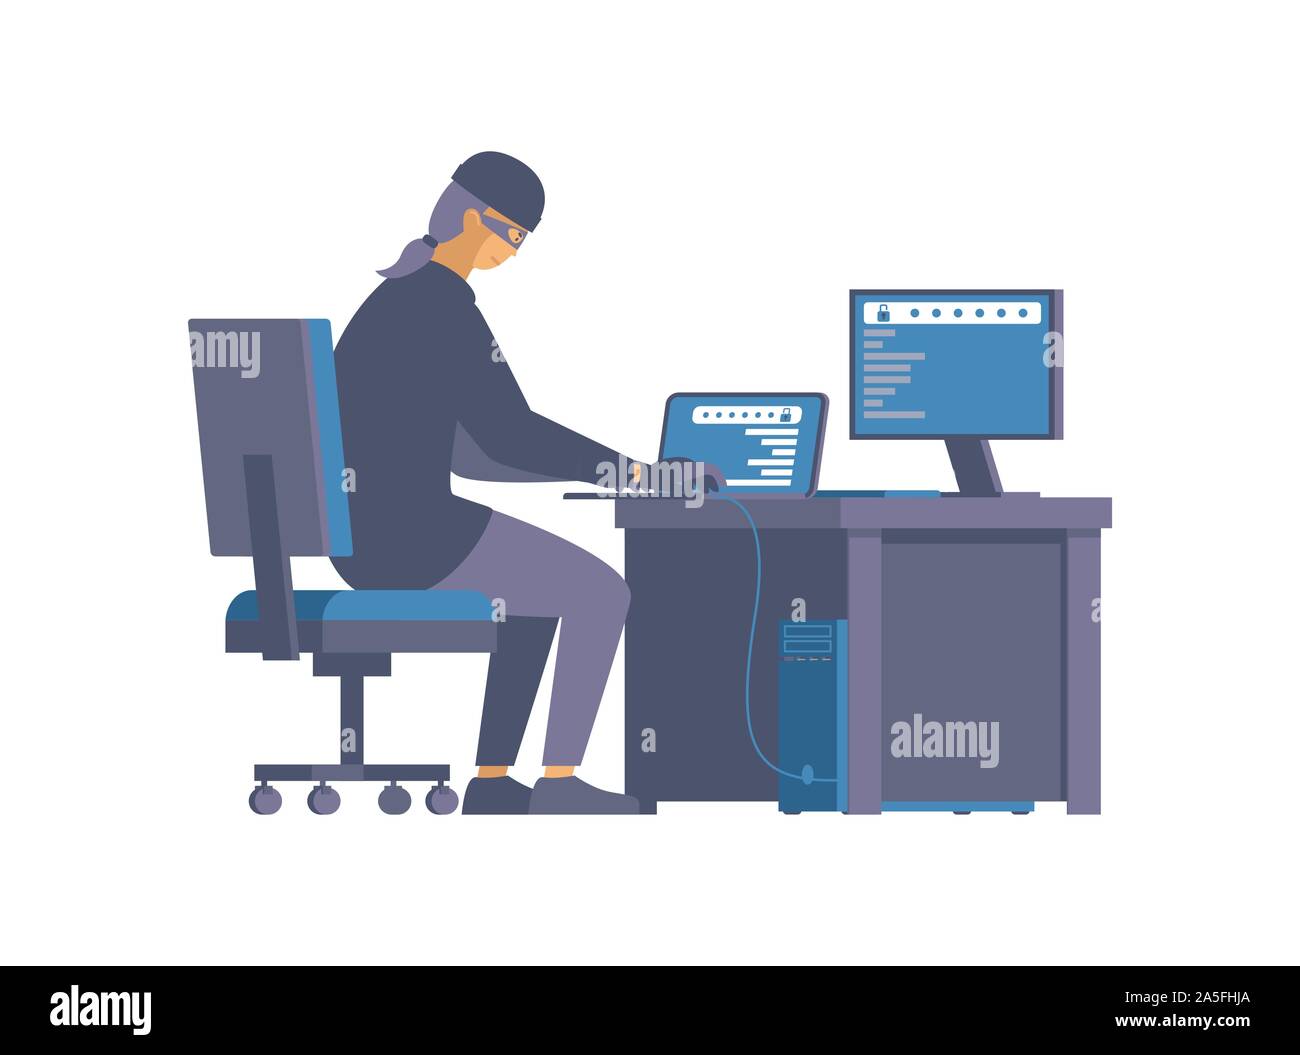 Hacking activity, cybercrime flat vector illustration. Dangerous thief in mask working with computer cartoon character. Cybercriminal stealing data, cybersecurity breach, hacker attack concept Stock Vector